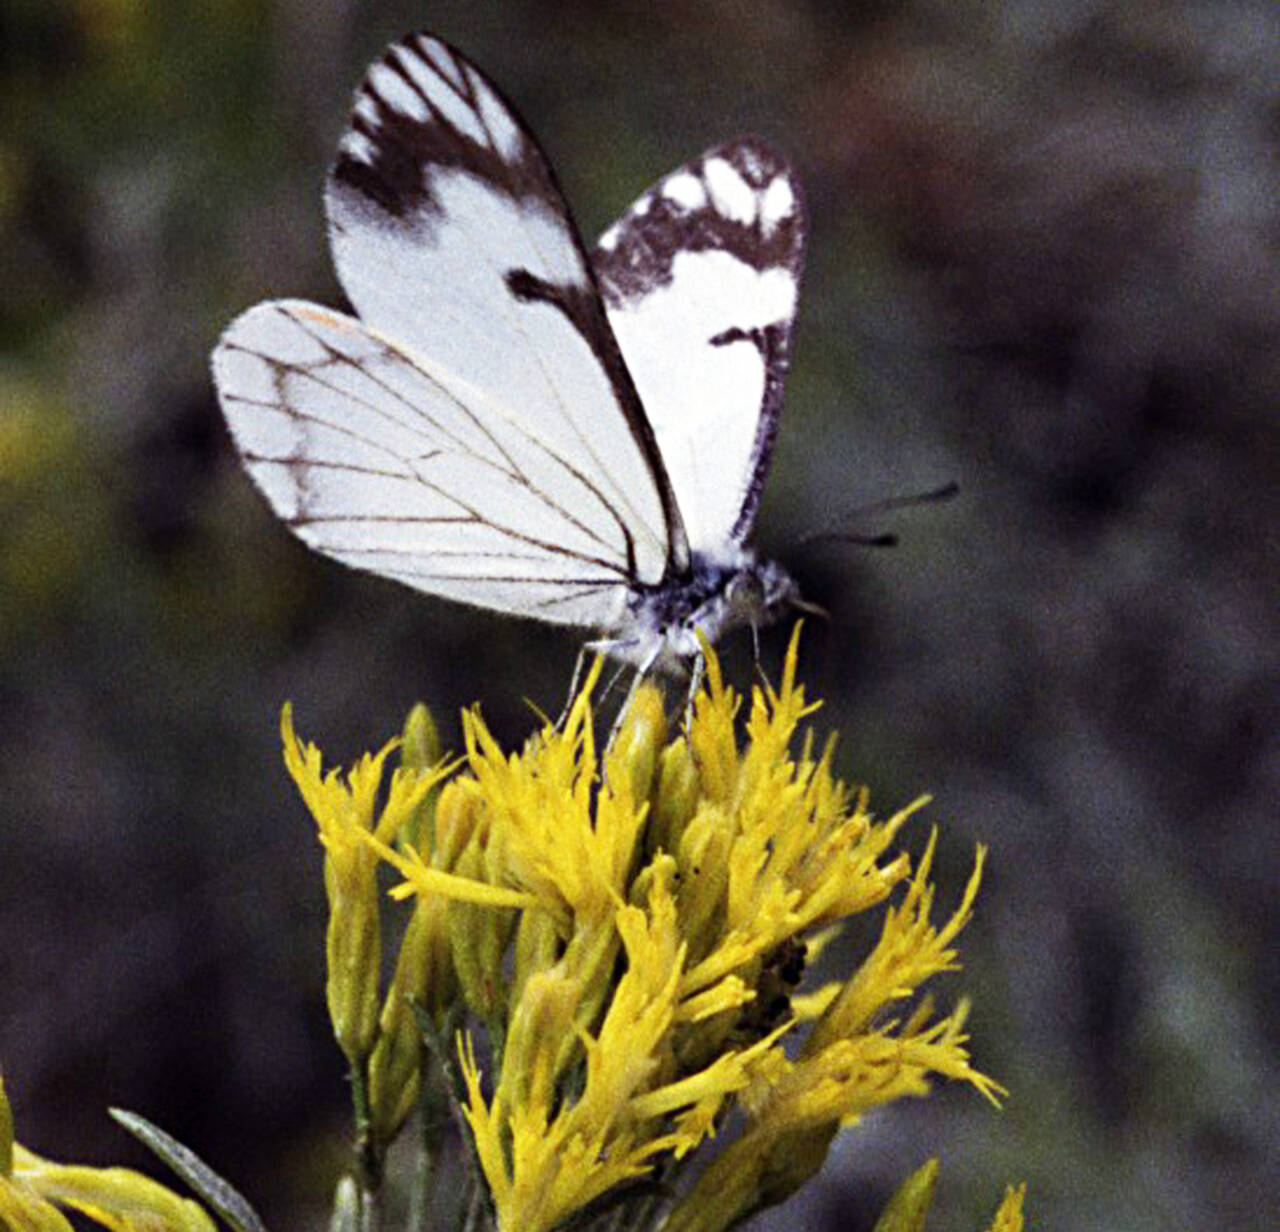 Photo by Terry Spivey, USDA Forest Service (Bugwood.org)
Attract butterflies like this white pine butterfly to your home garden using certain native plants.